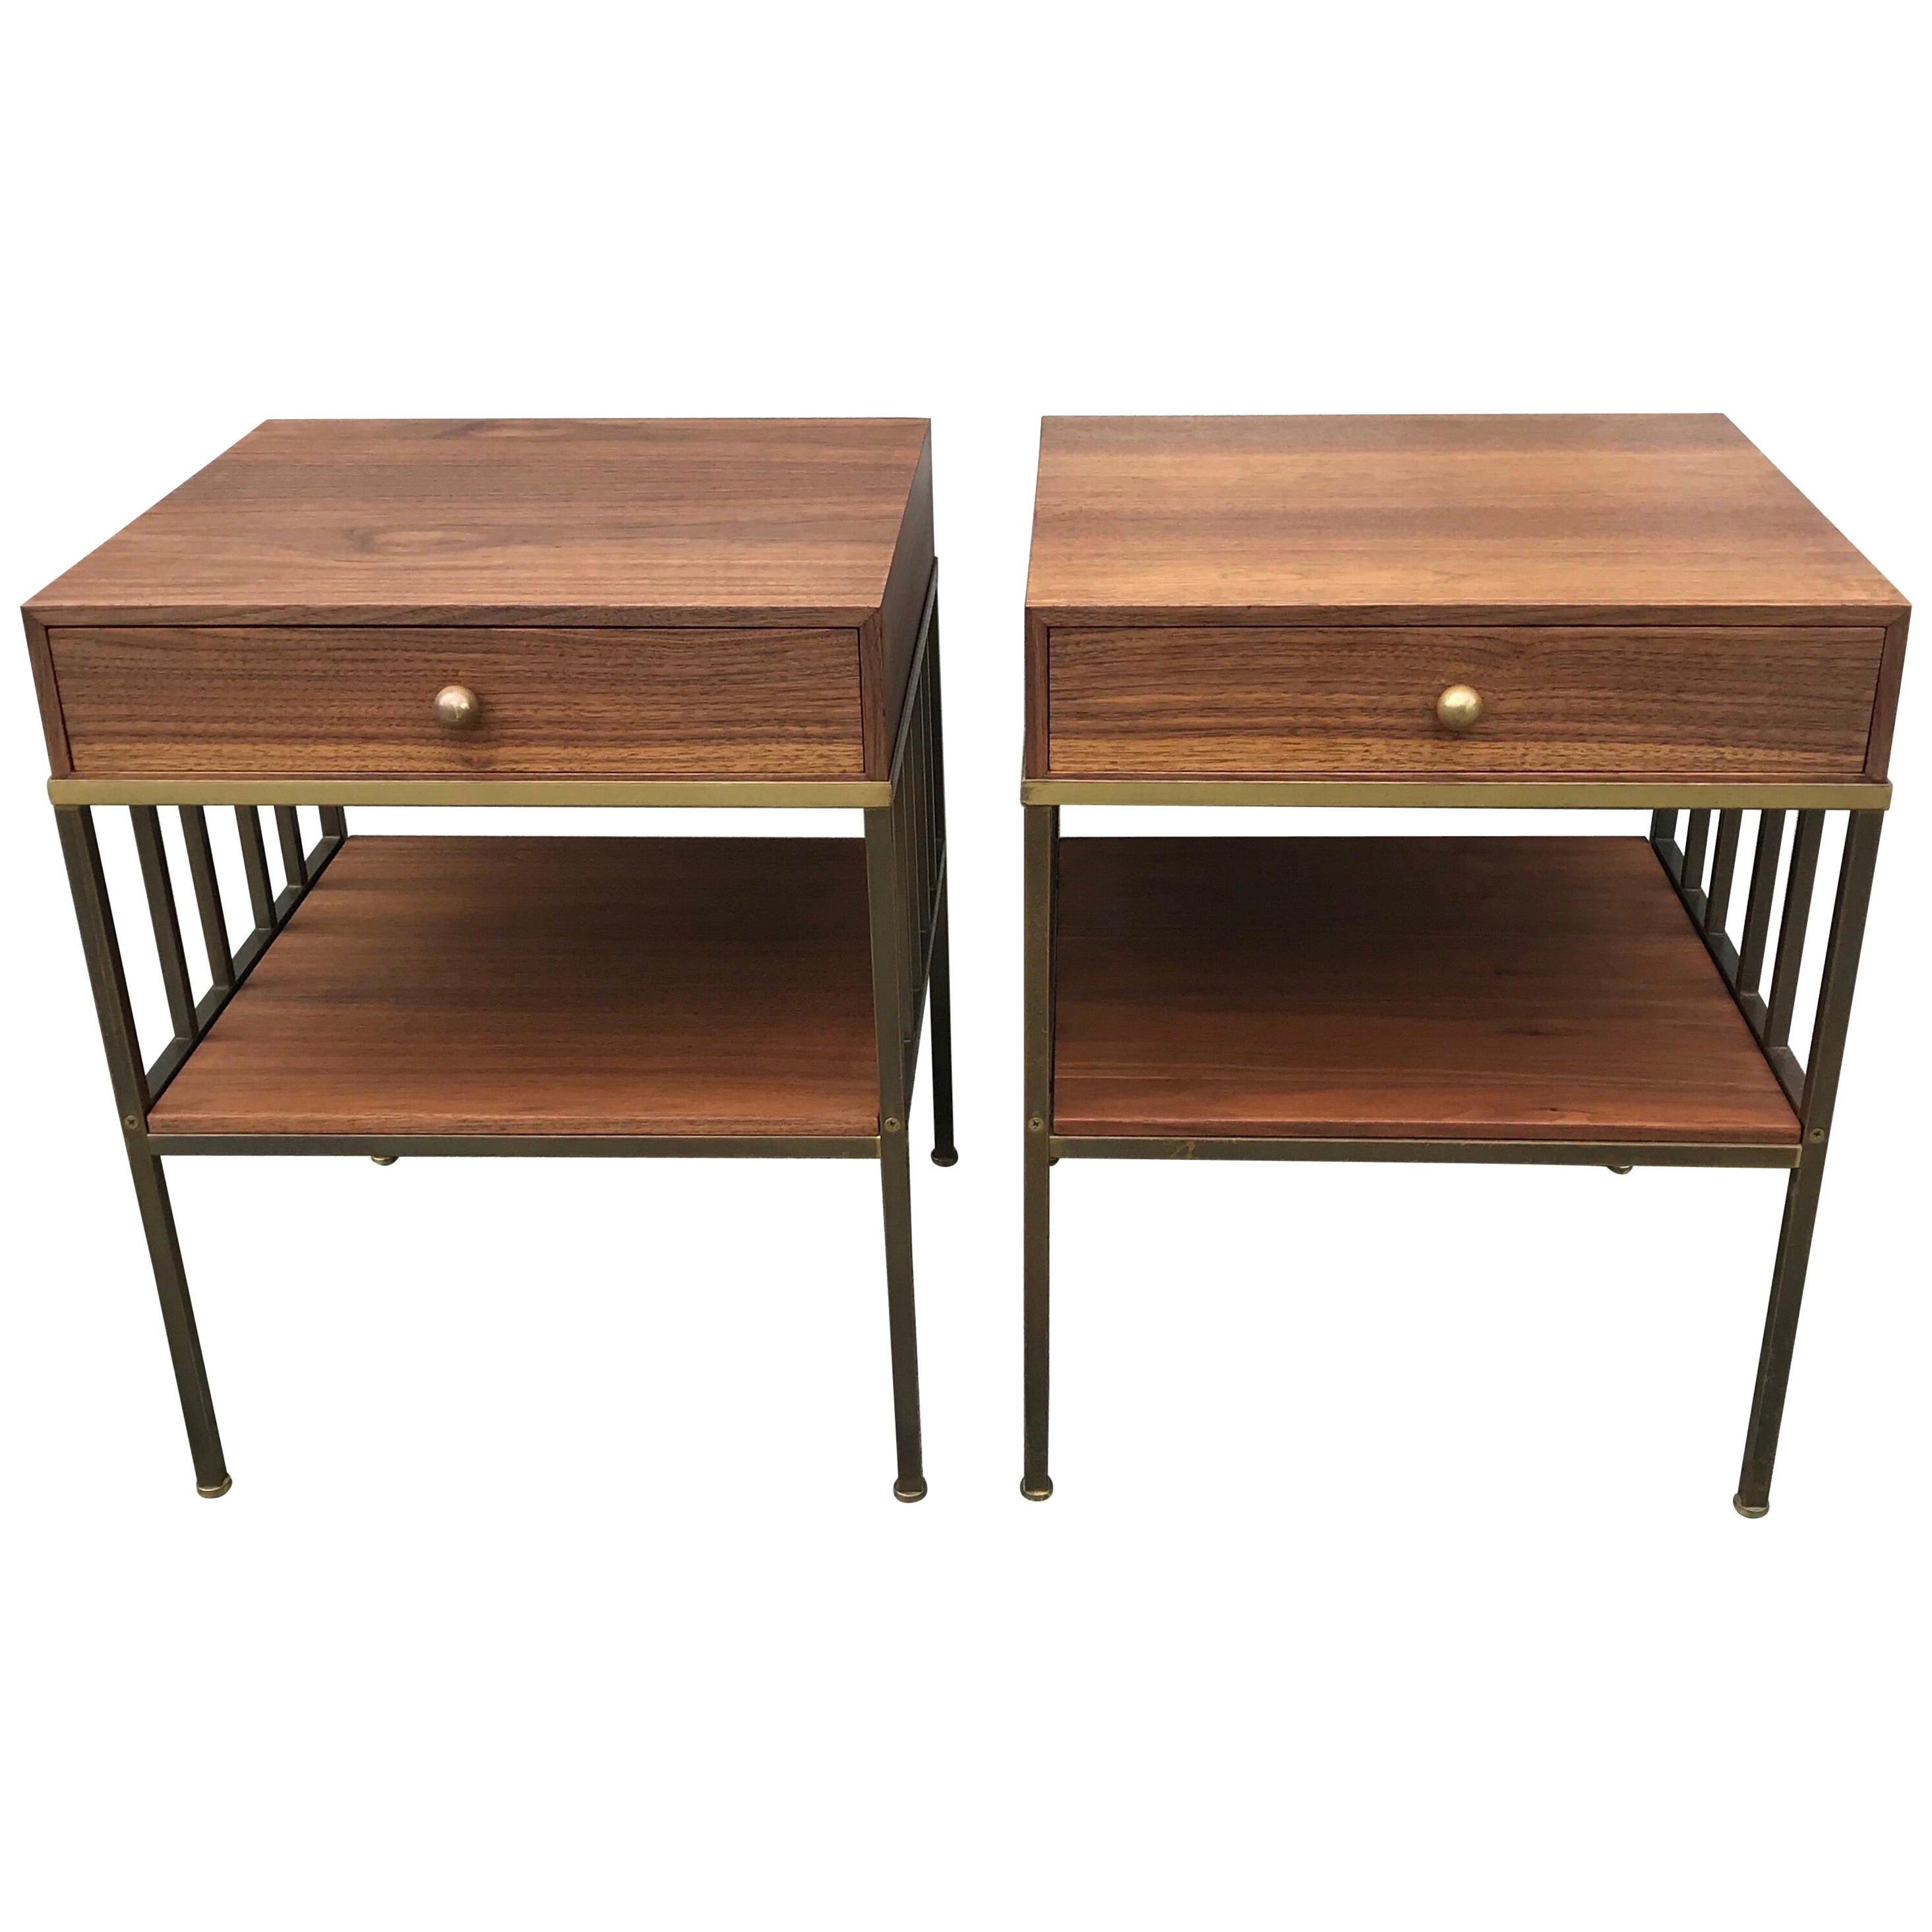 Pair of Mid-Century Modern Side Tables or Nightstands in the Style Paul McCobb